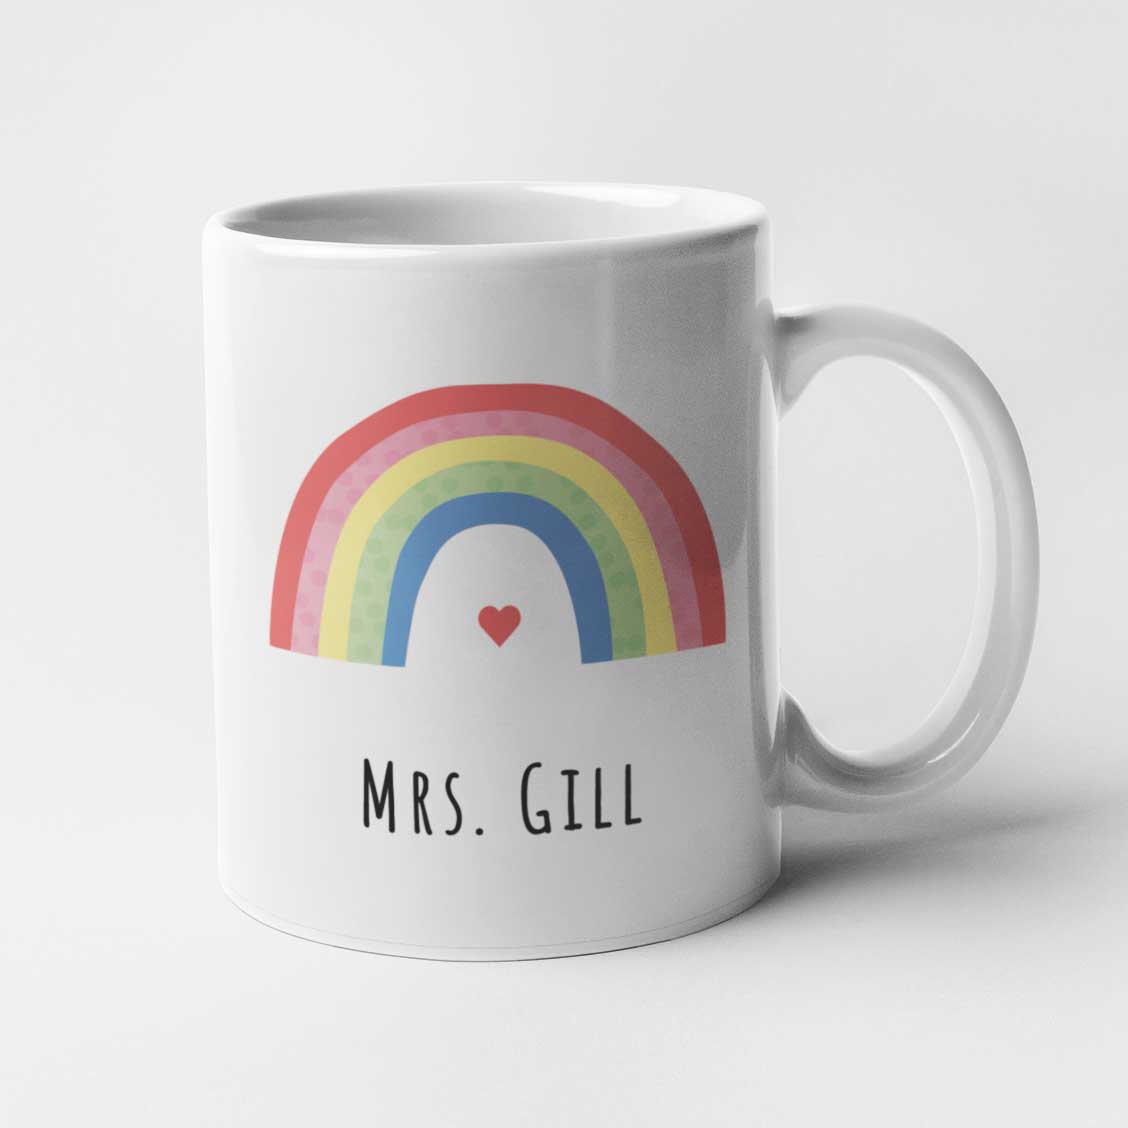 Thankyou For Being A Top Teacher Rainbow Personalised Mug